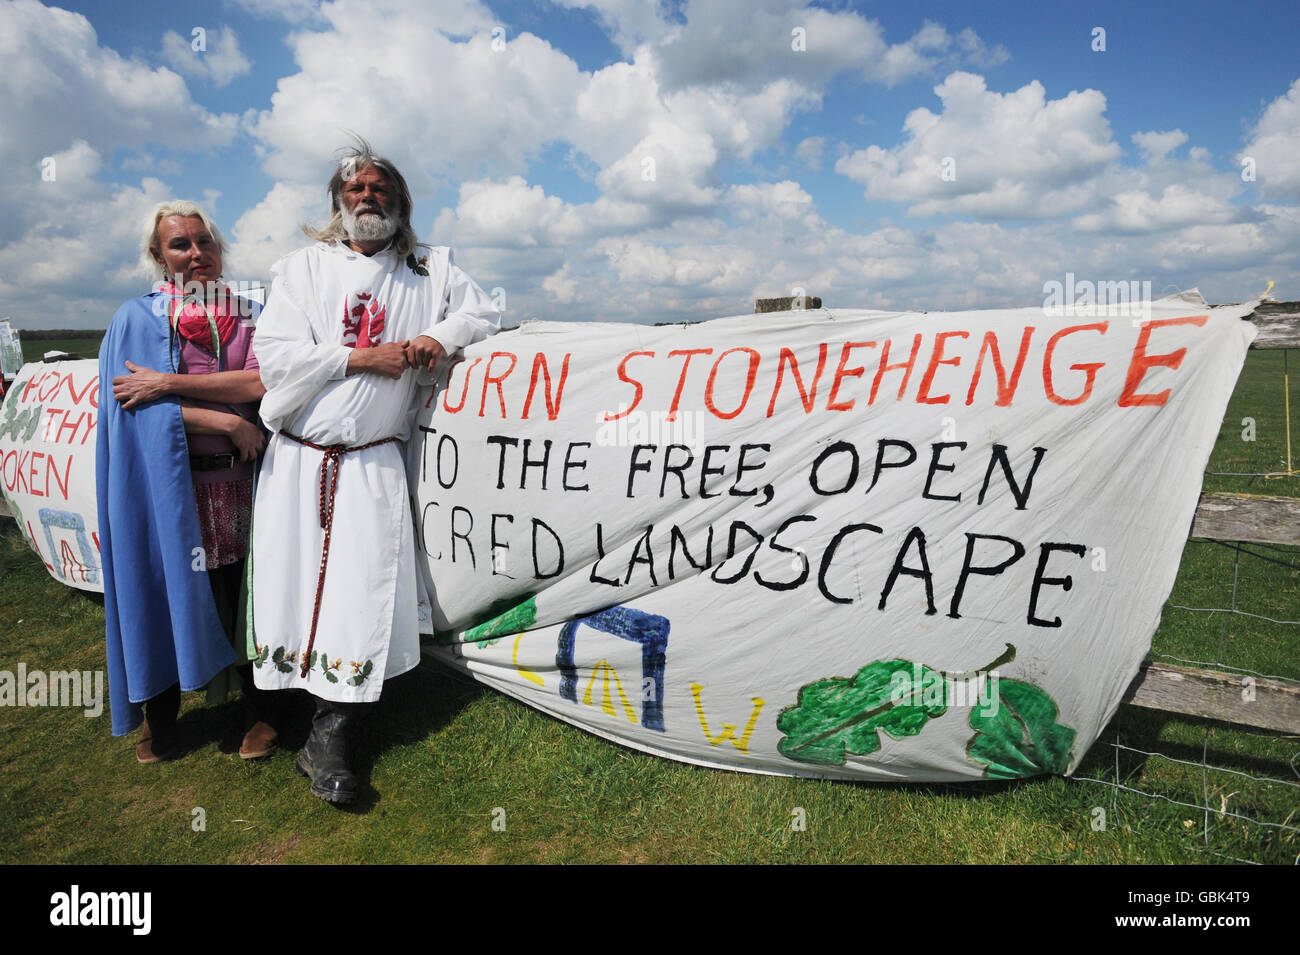 King Arthur Pendragon and his partner Kazz also known as Calliope with picket line banners after a judge evicted him from his live-in protest site at Stonehenge. Stock Photo